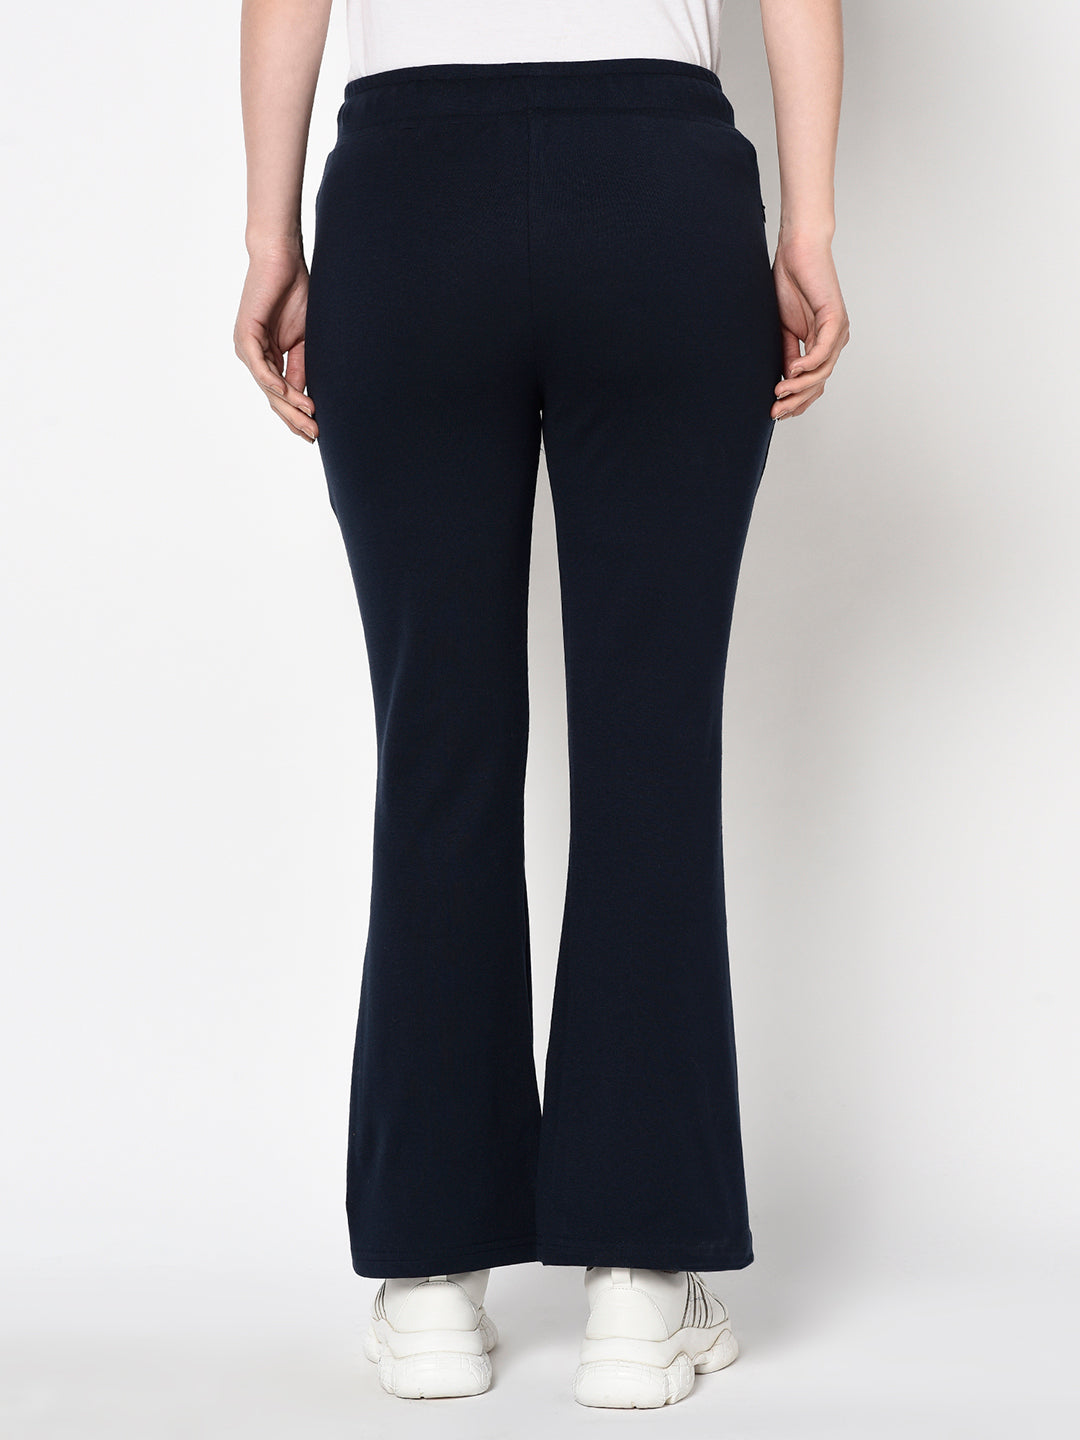 Navy Blue Bell Bottomed Stretch Fabric Track Pant With Zipper Pockets